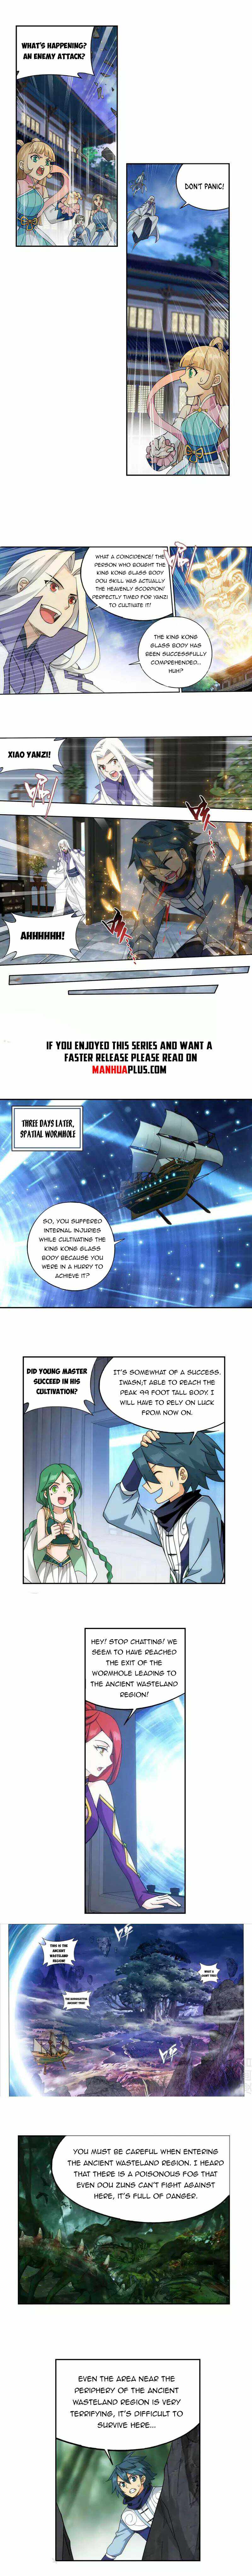 Battle Through The Heavens chapter 365 page 4